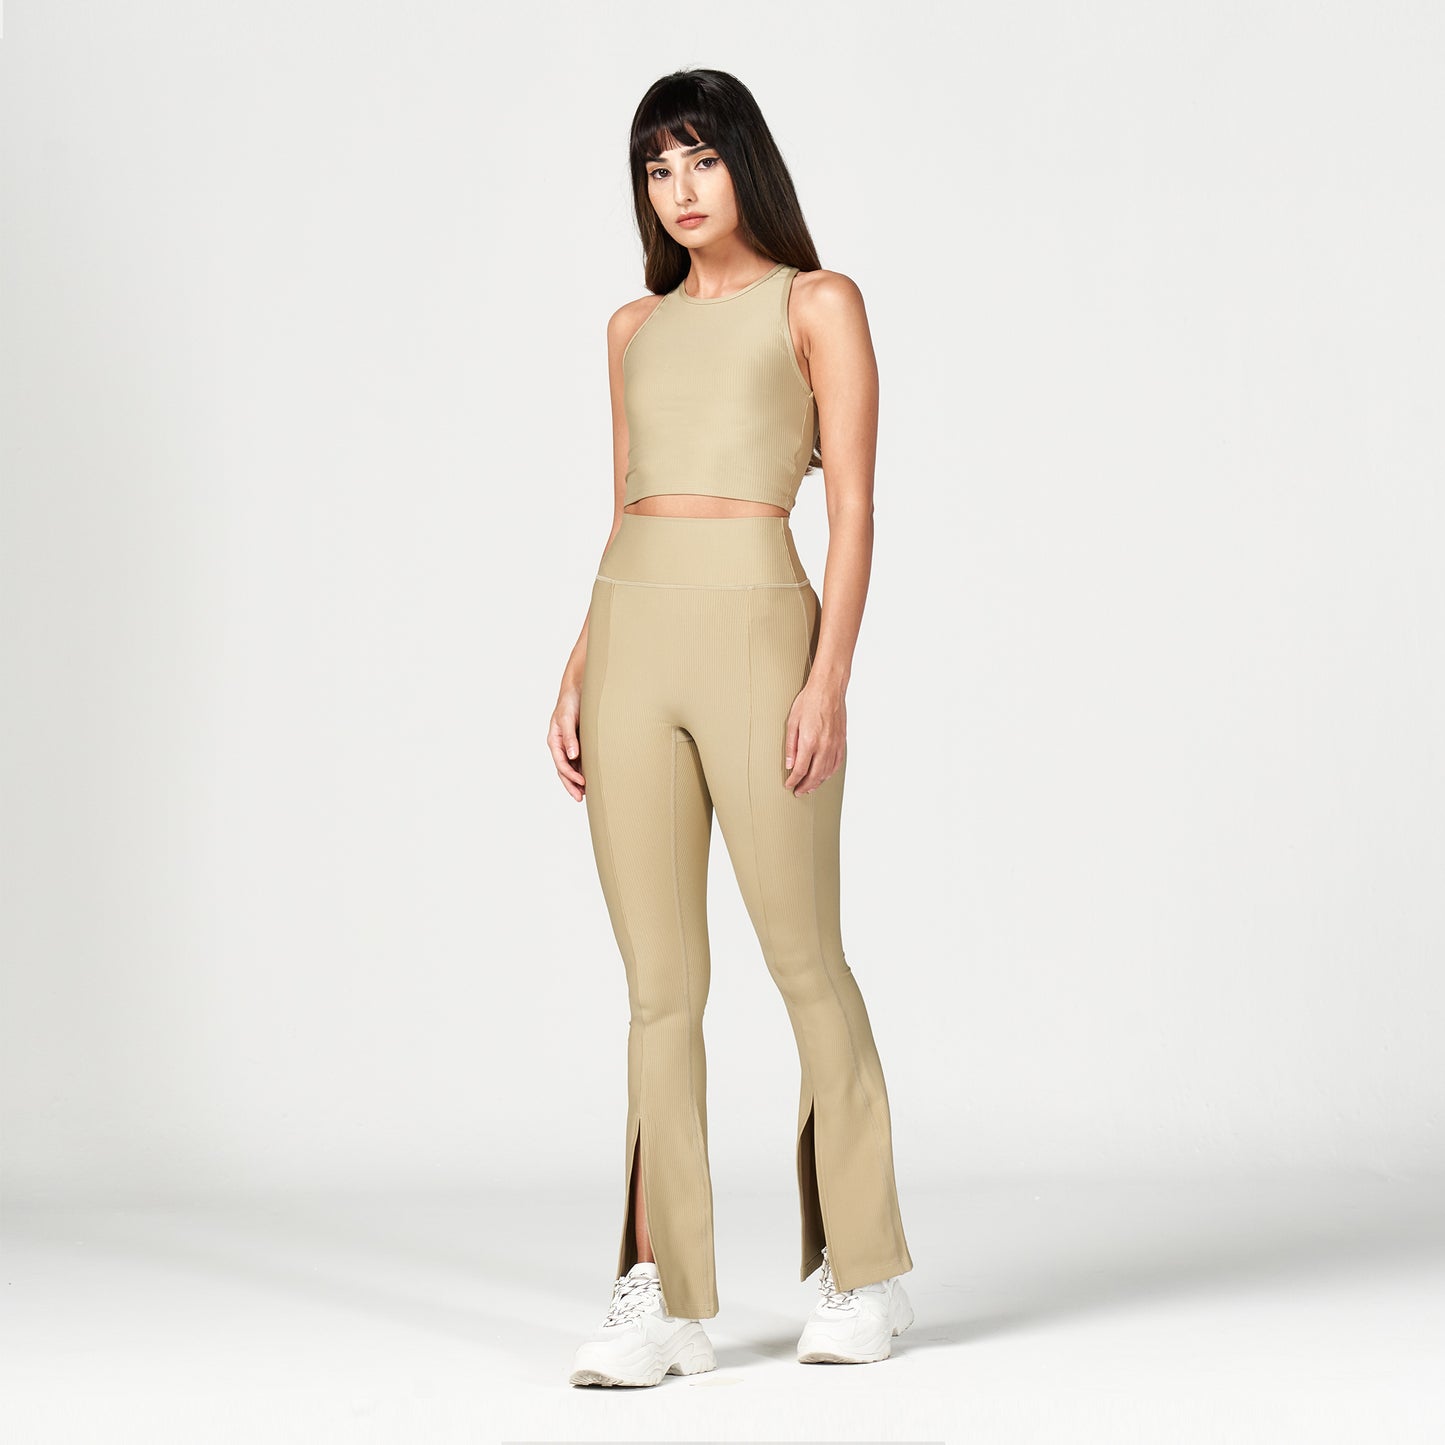 squatwolf-workout-clothes-code-flare-it-up-trousers-sand-gym-pants-for-women